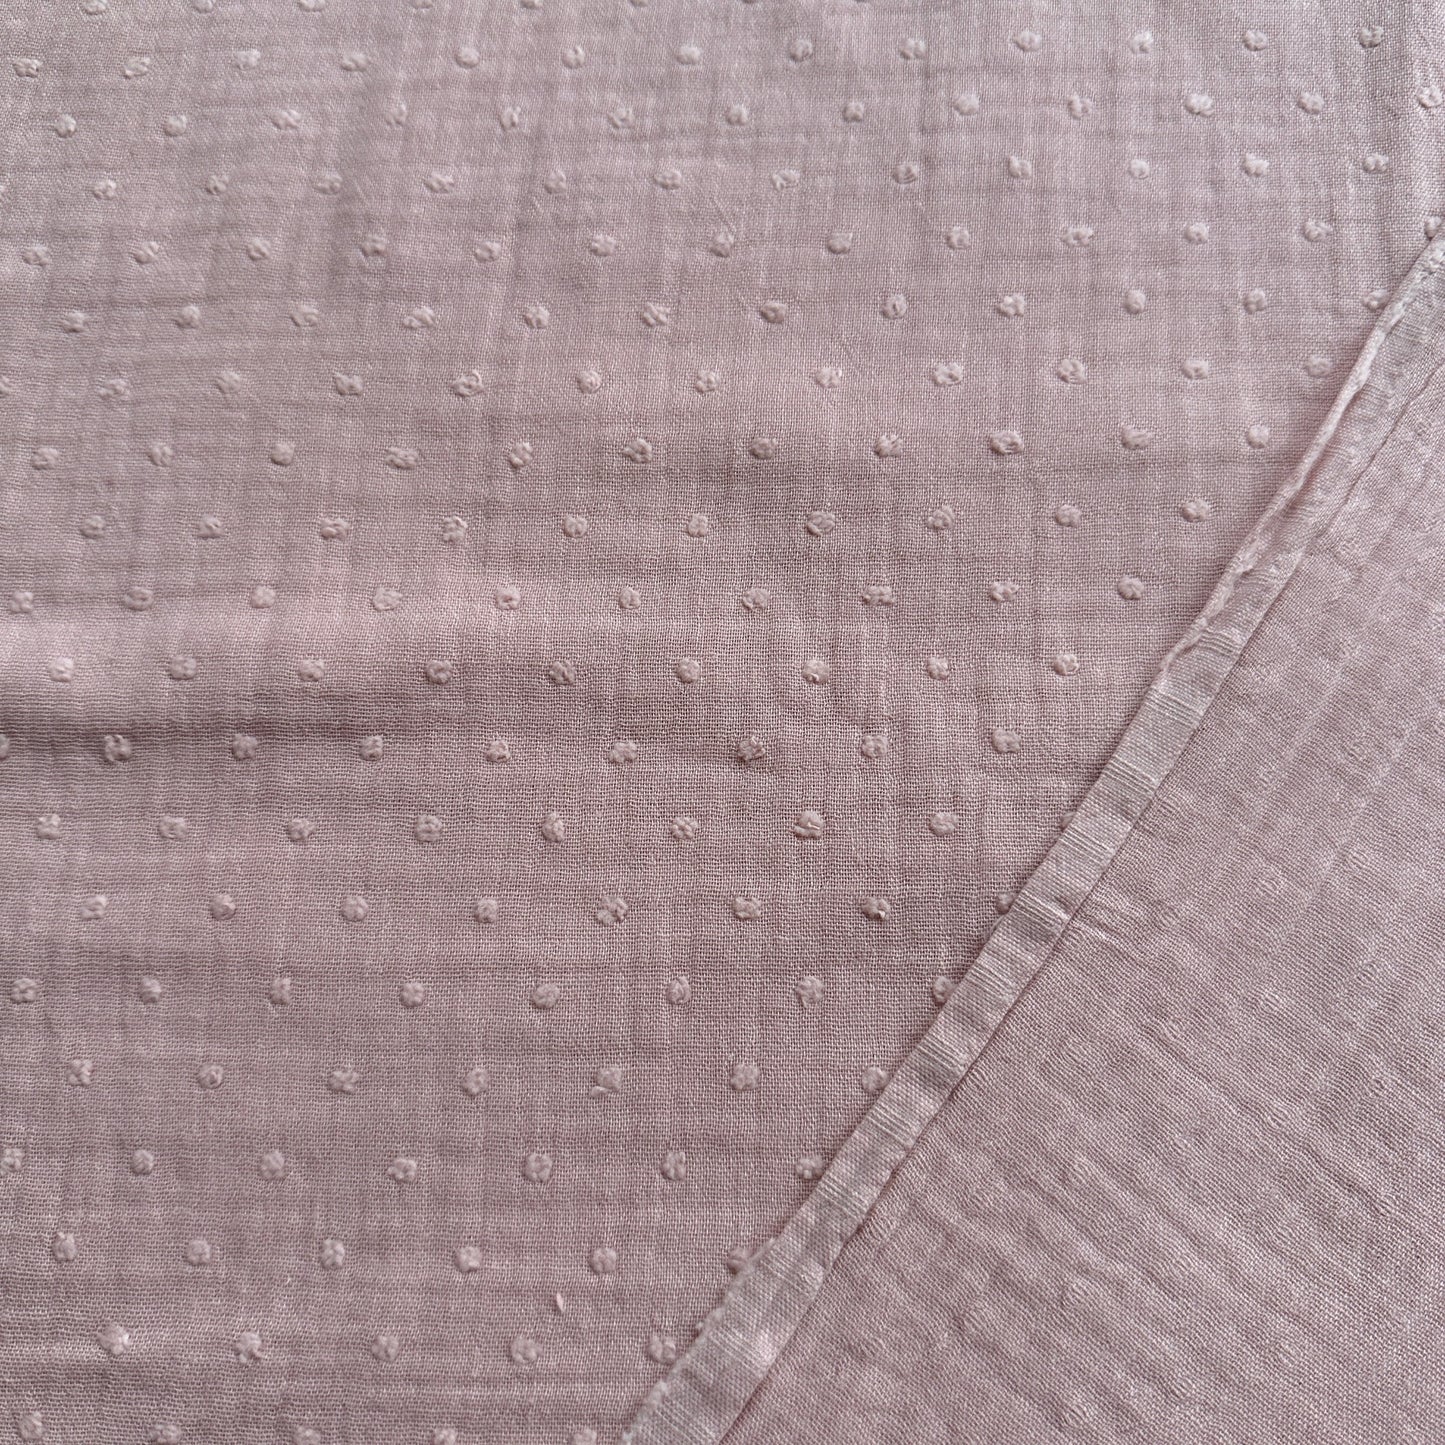 Dobby Cotton Double Gauze Fabric in Light Pink